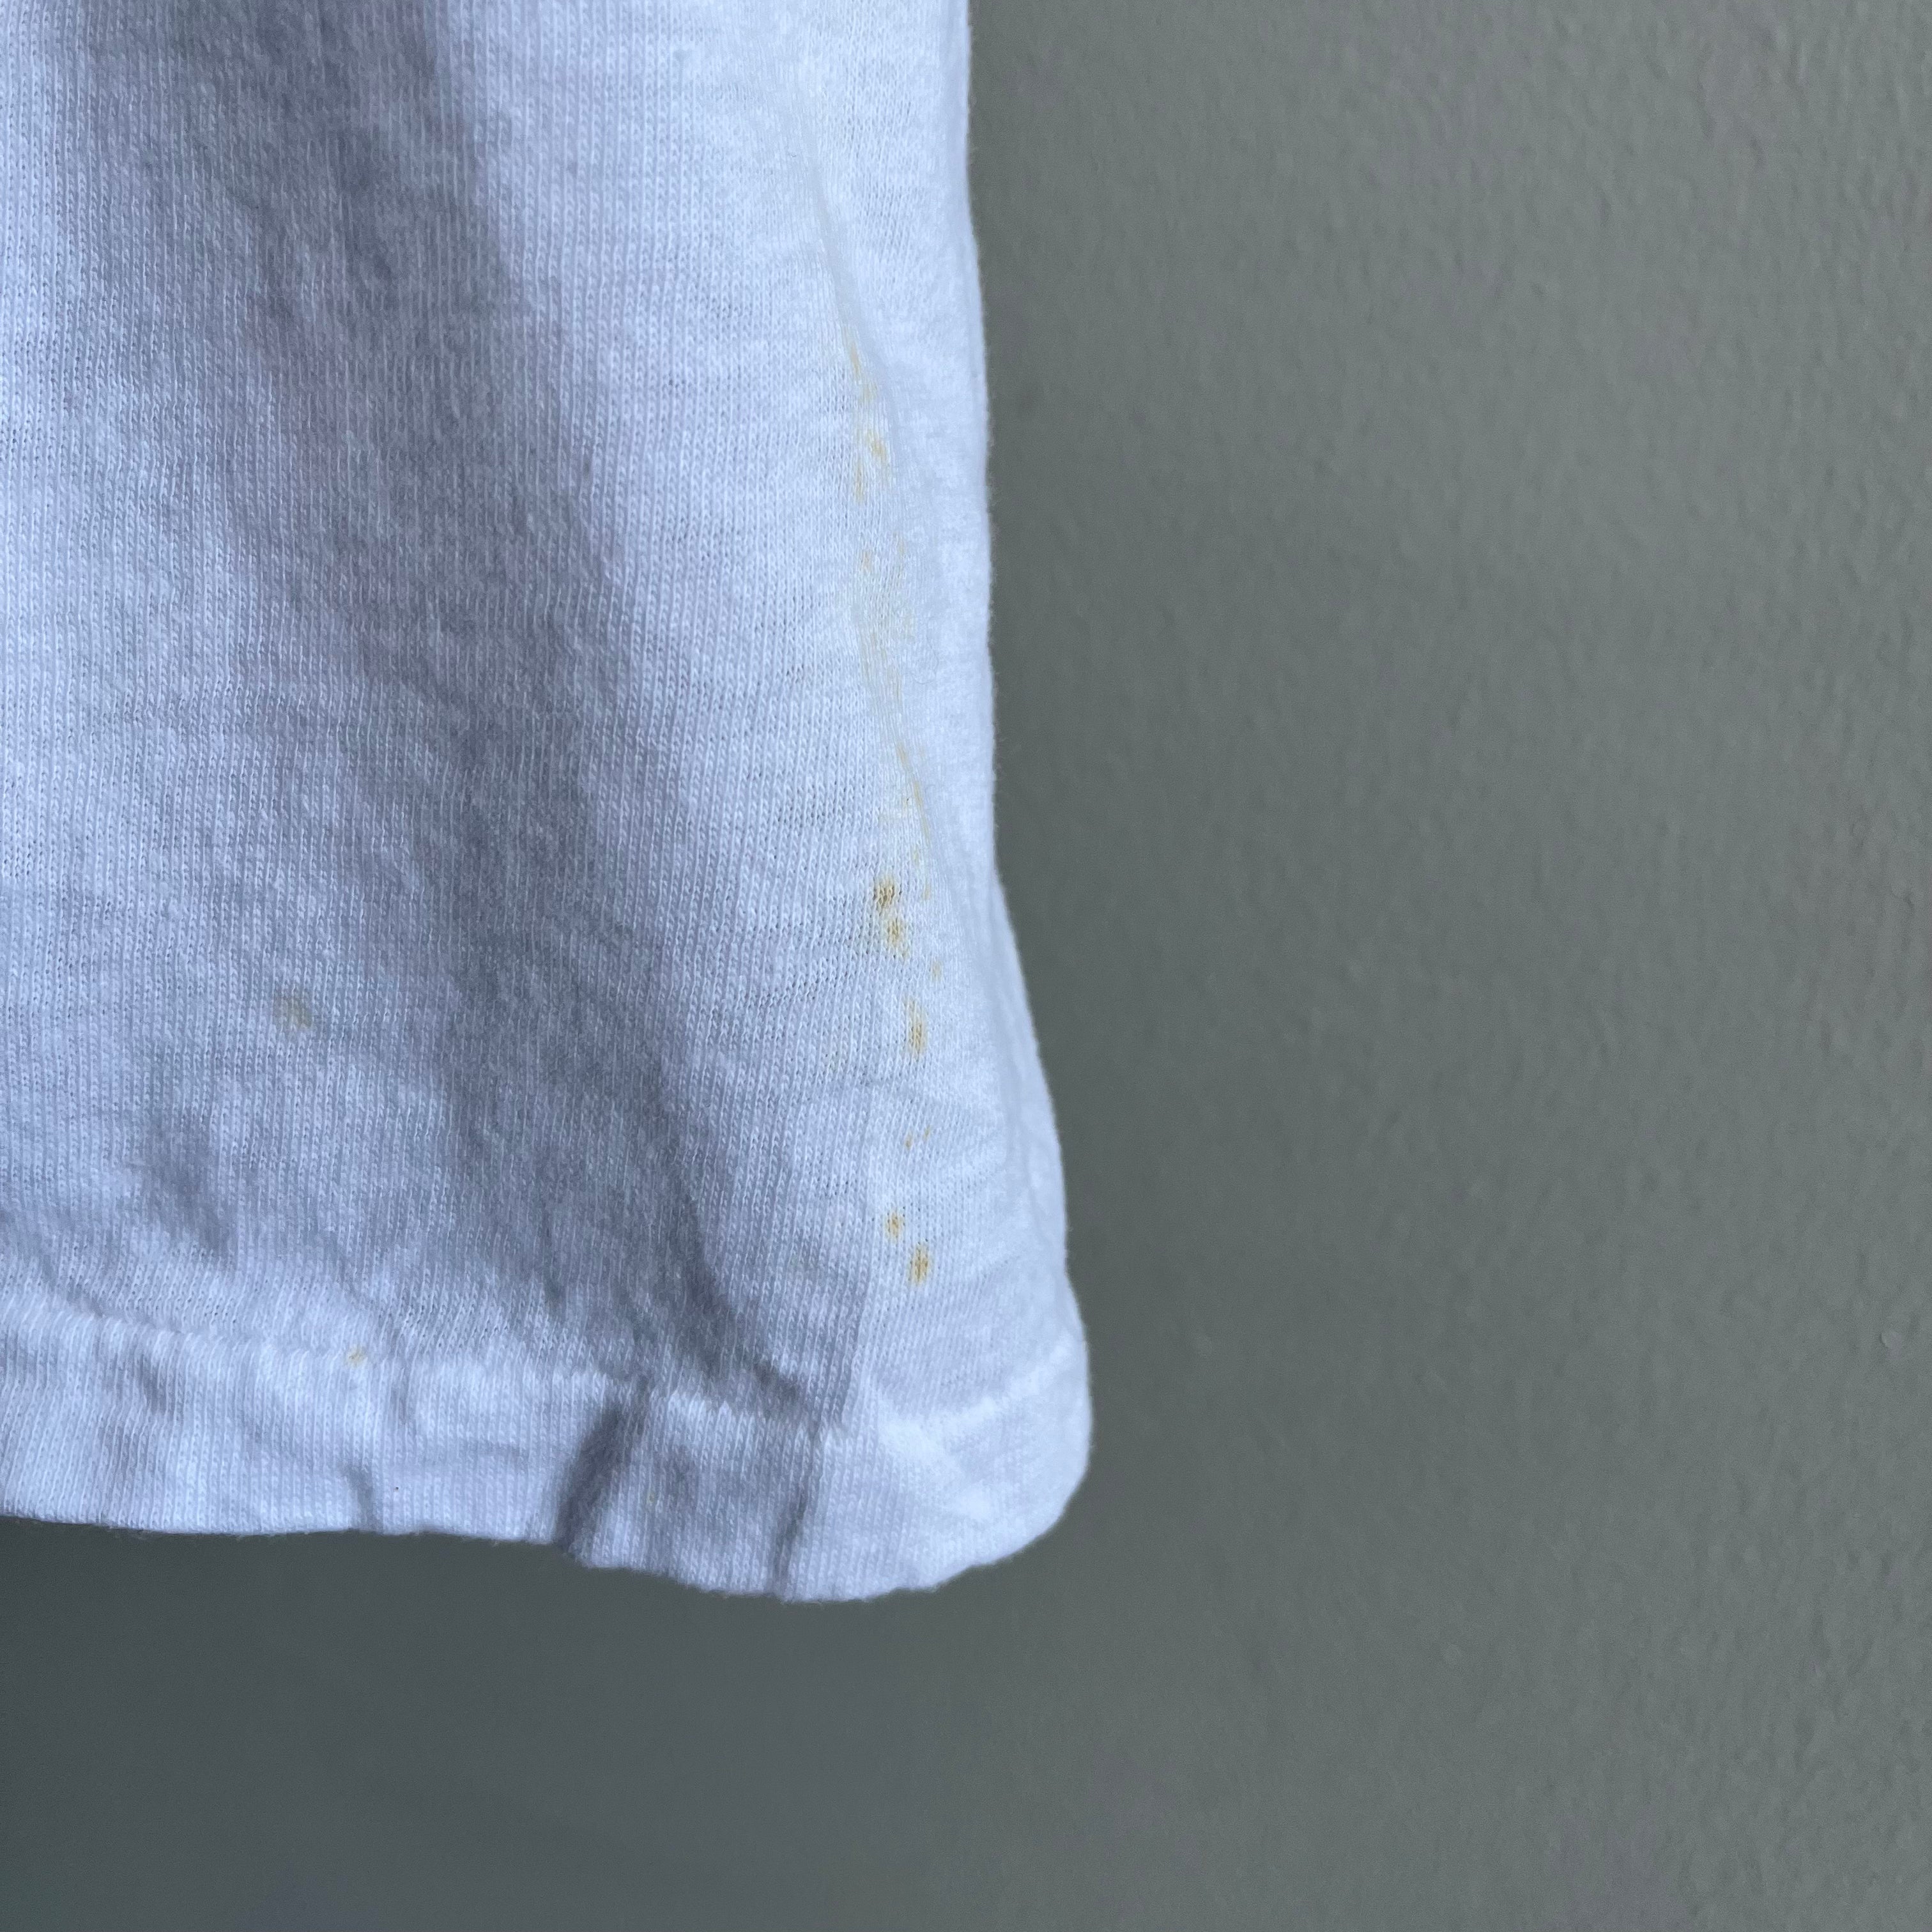 1980s Blank White T-Shirt with Rust Stains and Mending